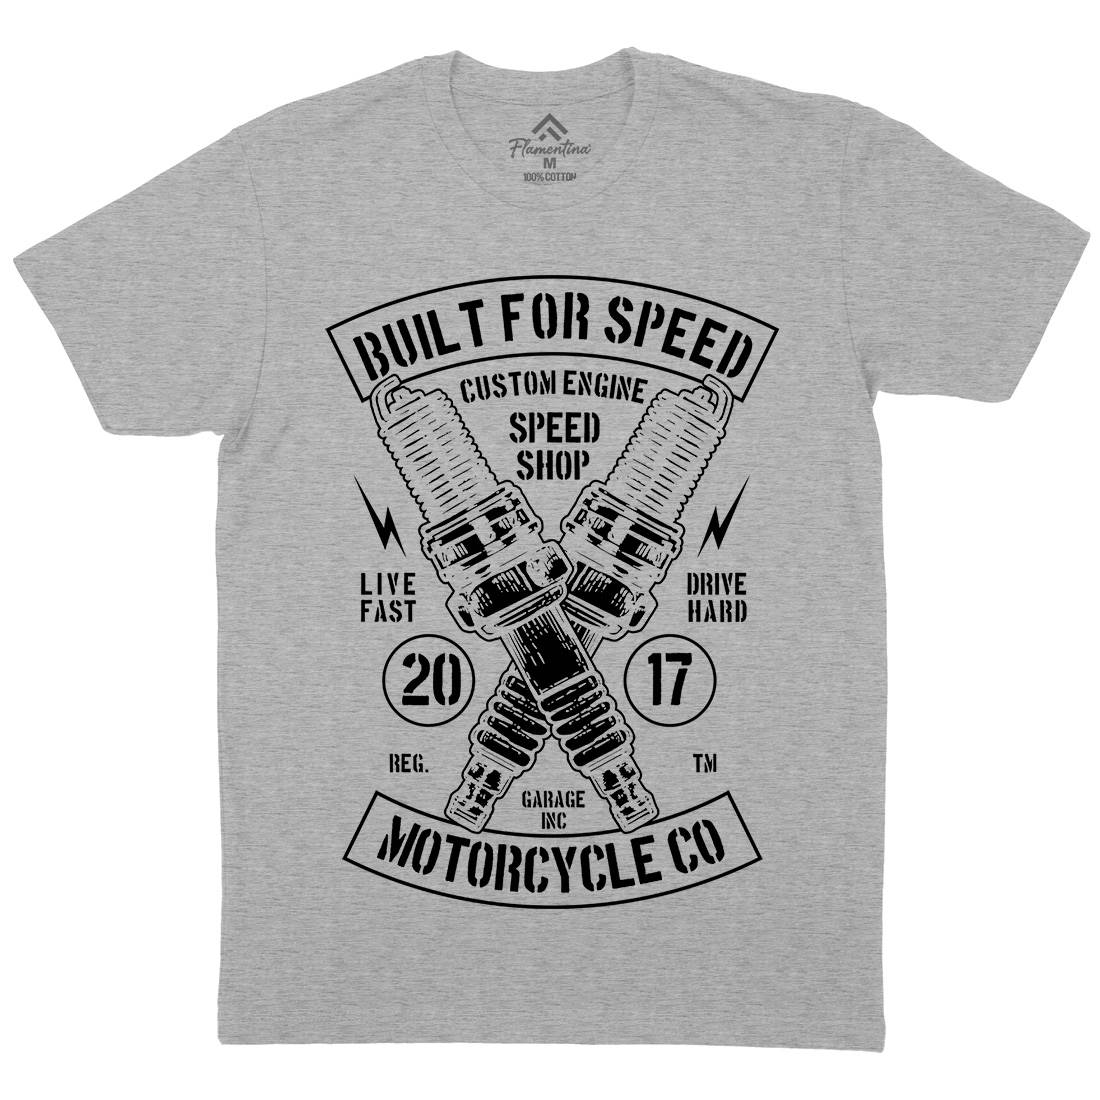 Built For Speed Mens Organic Crew Neck T-Shirt Motorcycles B188